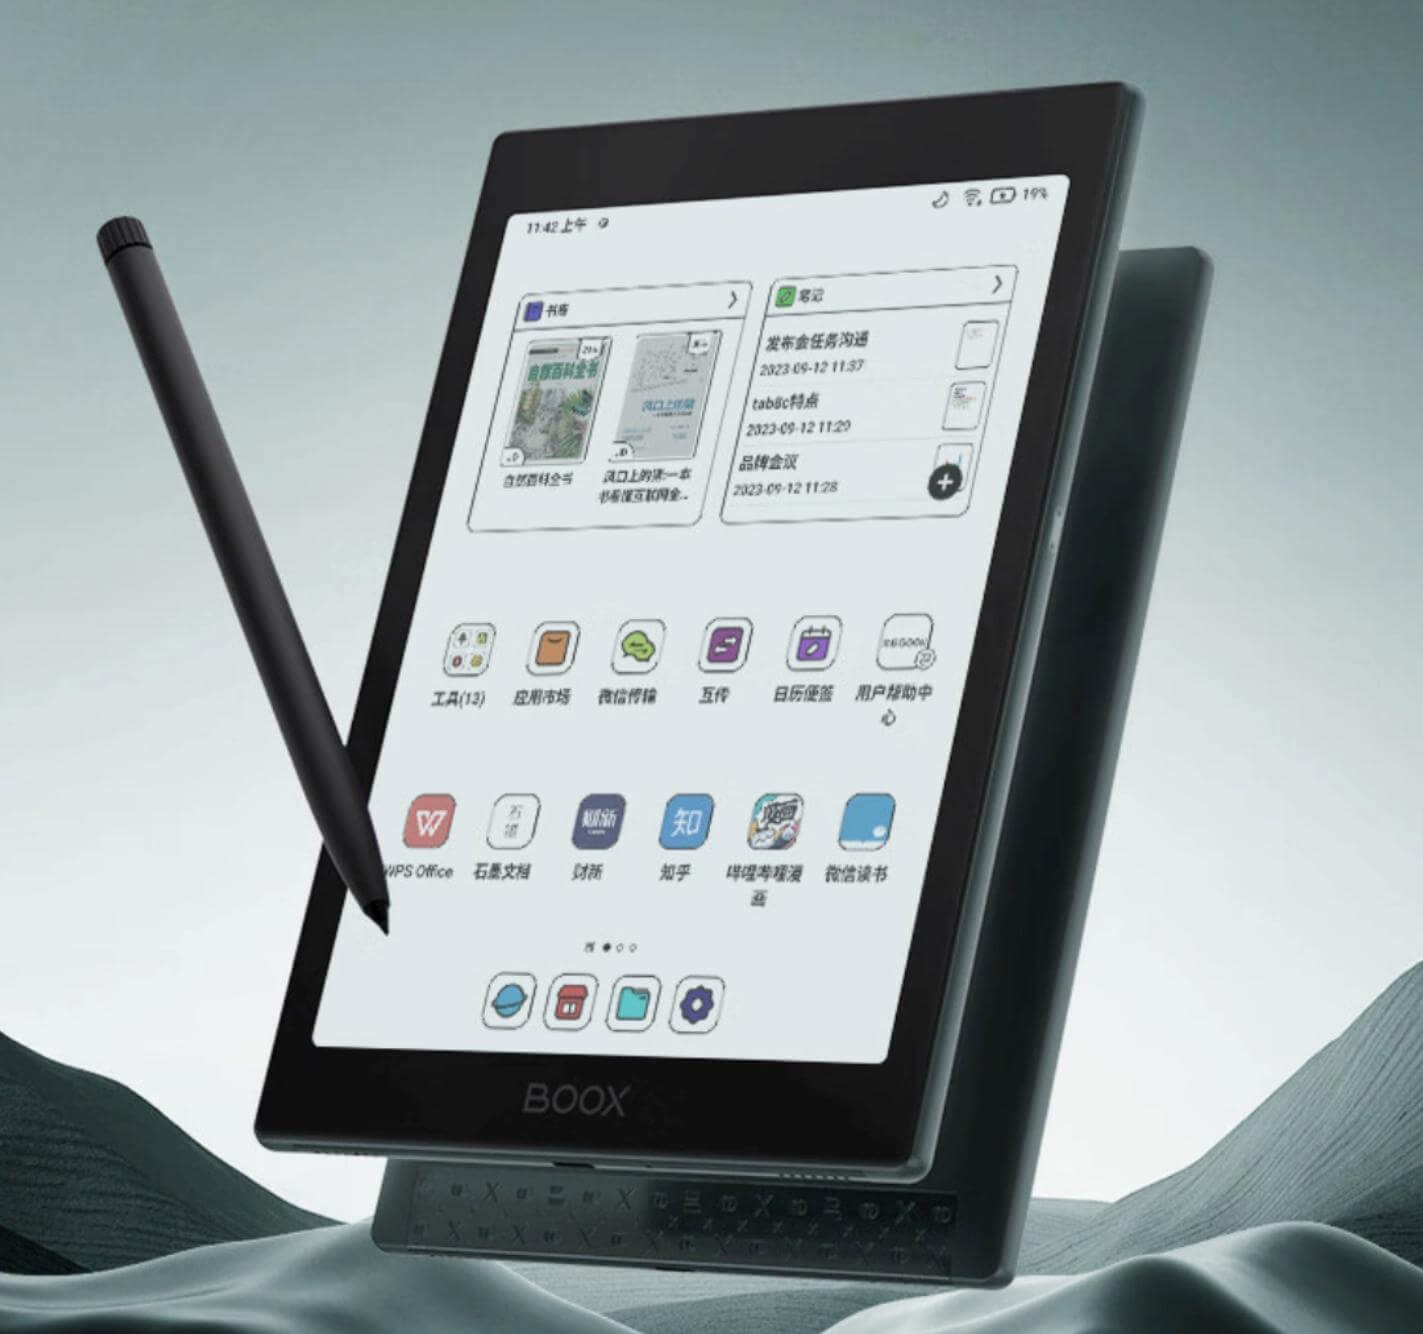 Boox Tab8 tablet with improved E Ink display launched - Good e-Reader